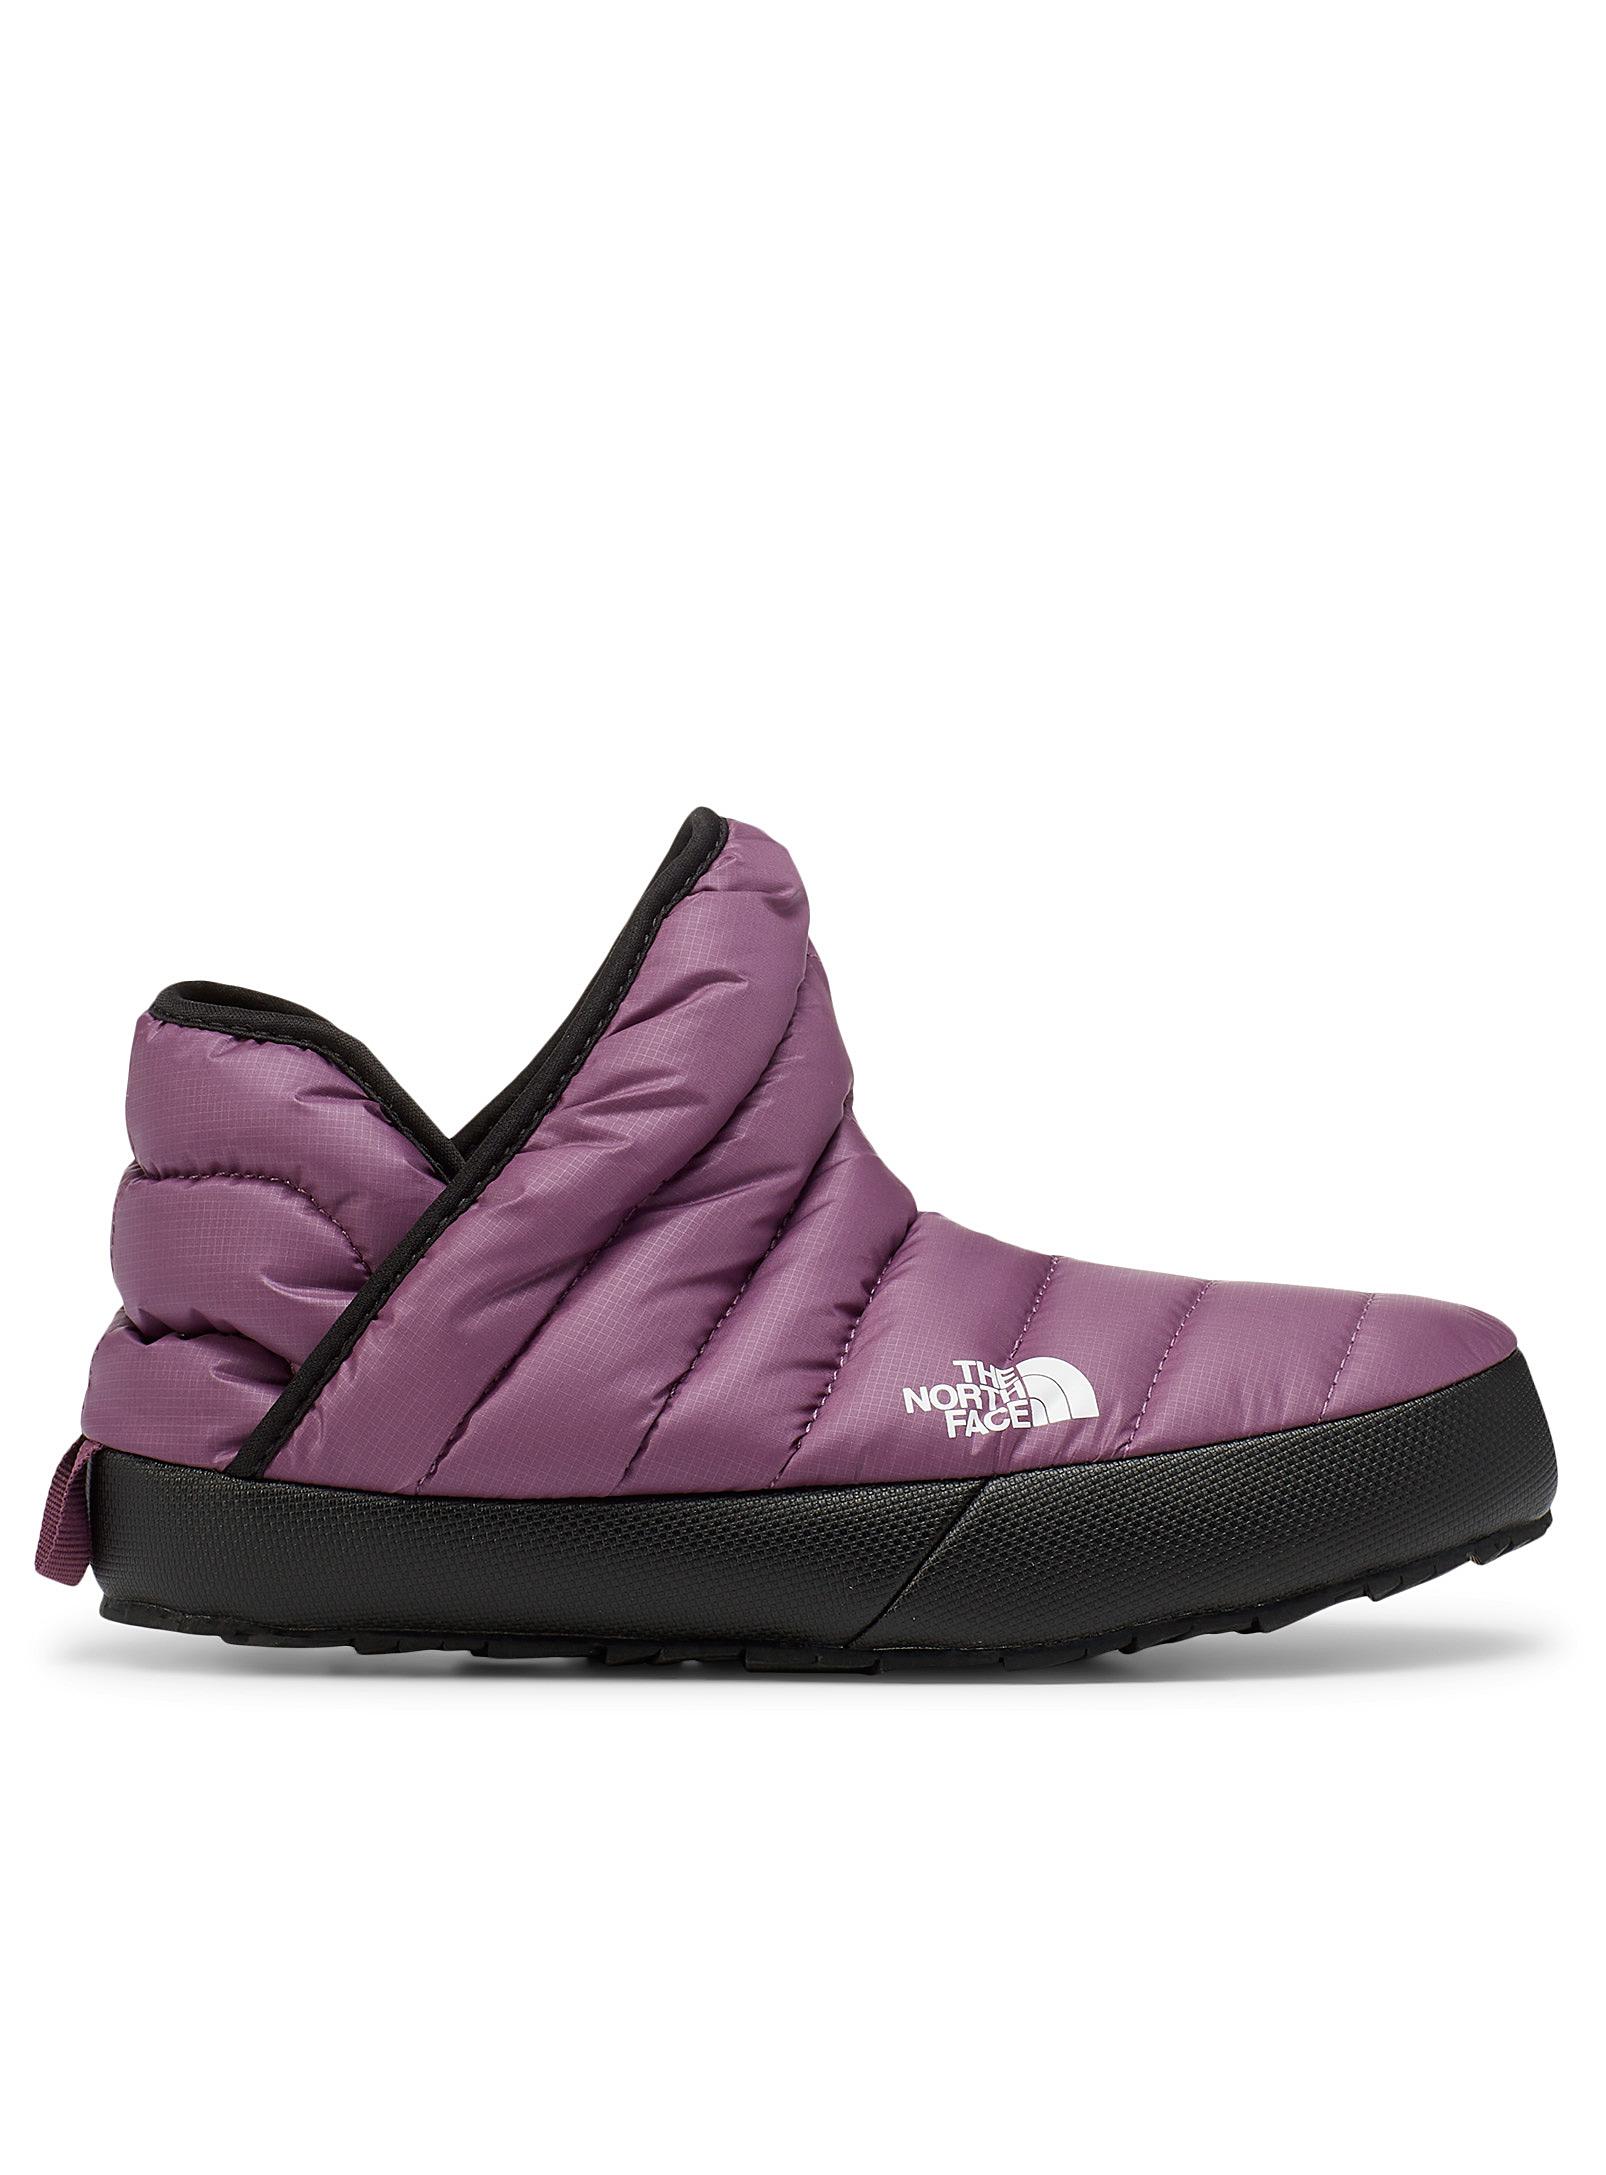 The North Face Thermoball Traction Bootie Slippers Women in Purple